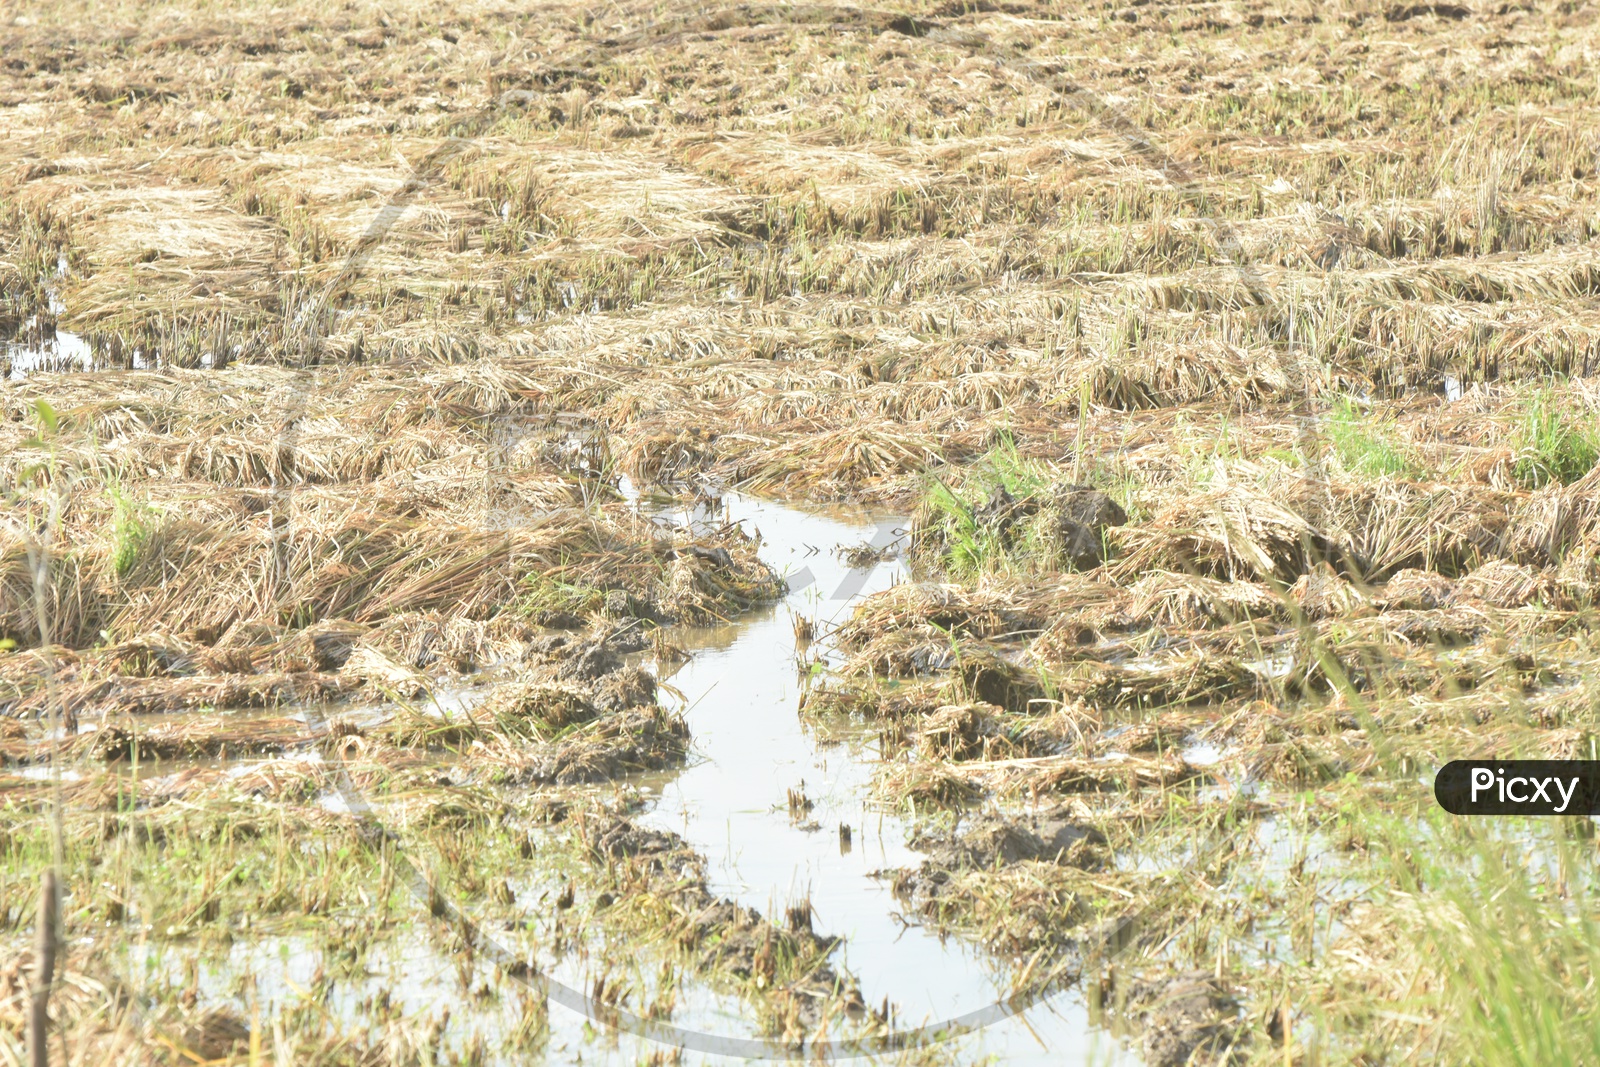 Damaged or Flooded Rice Fields Or Paddy Lands due to Heavy Rains